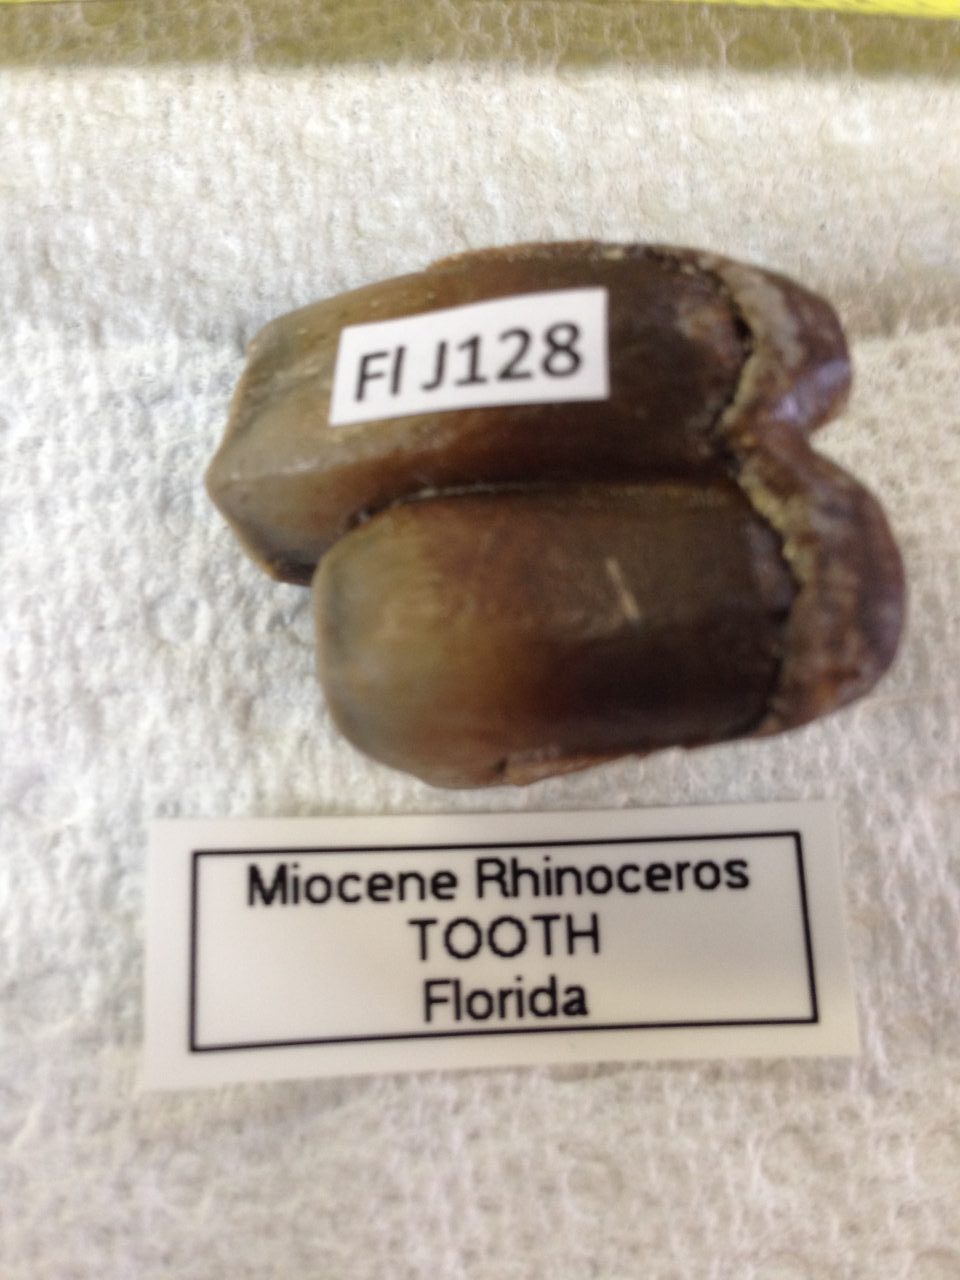 Rhinoceros Menoceras Barbouri Tooth Fossil from Florida | Fossils & Artifacts for Sale | Paleo Enterprises | Fossils & Artifacts for Sale